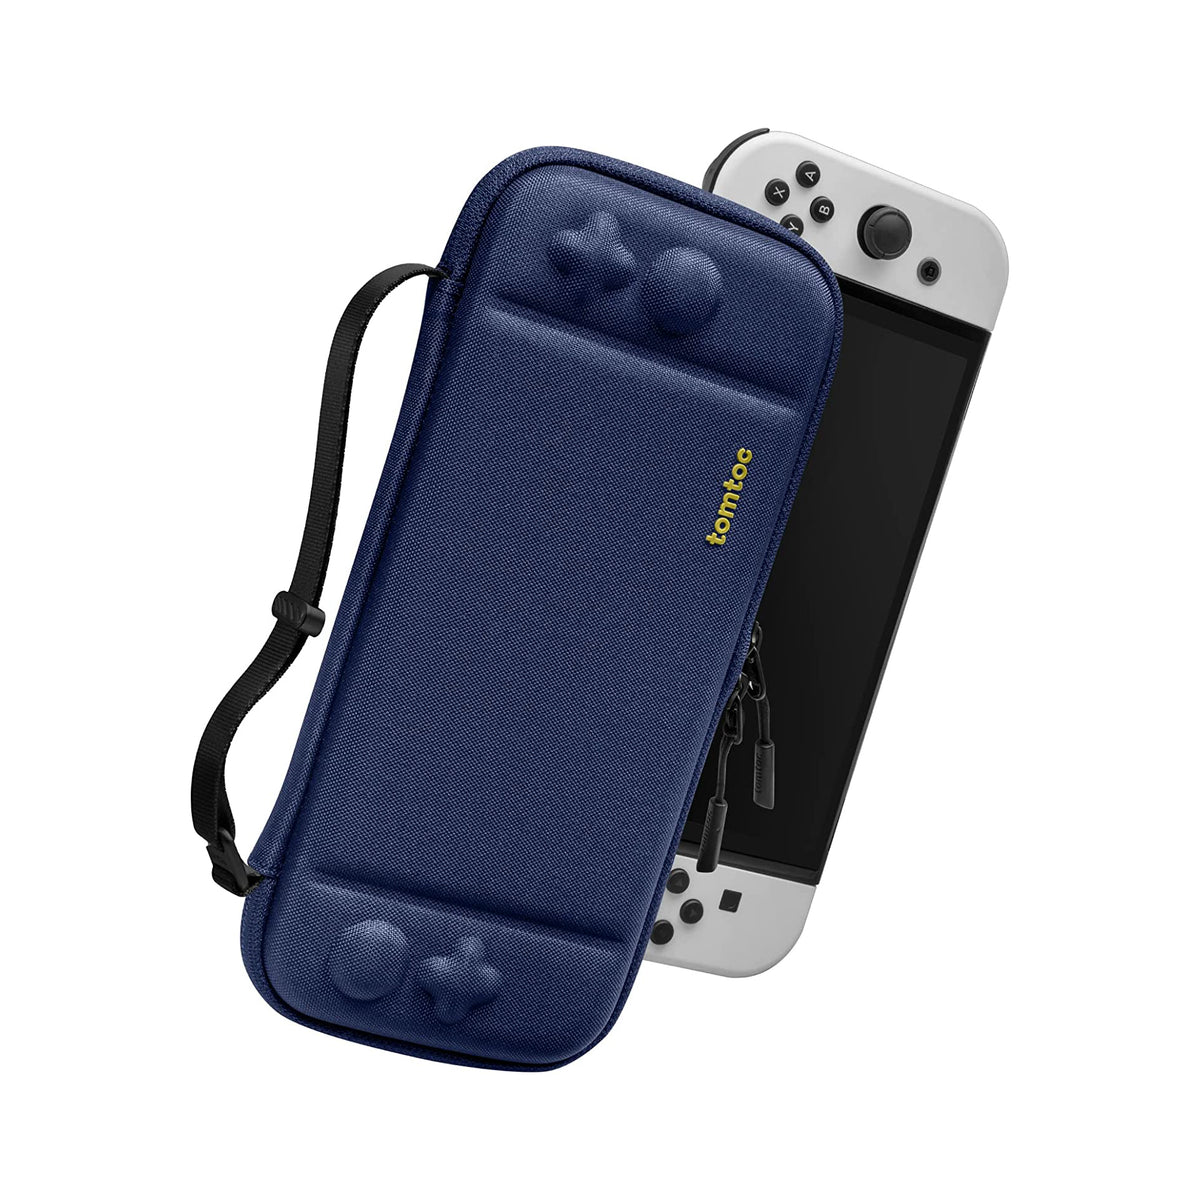 tomtoc Slim Protective Carrying Case with 10 Game Cartridges - Nintendo Switch & OLED Model - Ink Blue